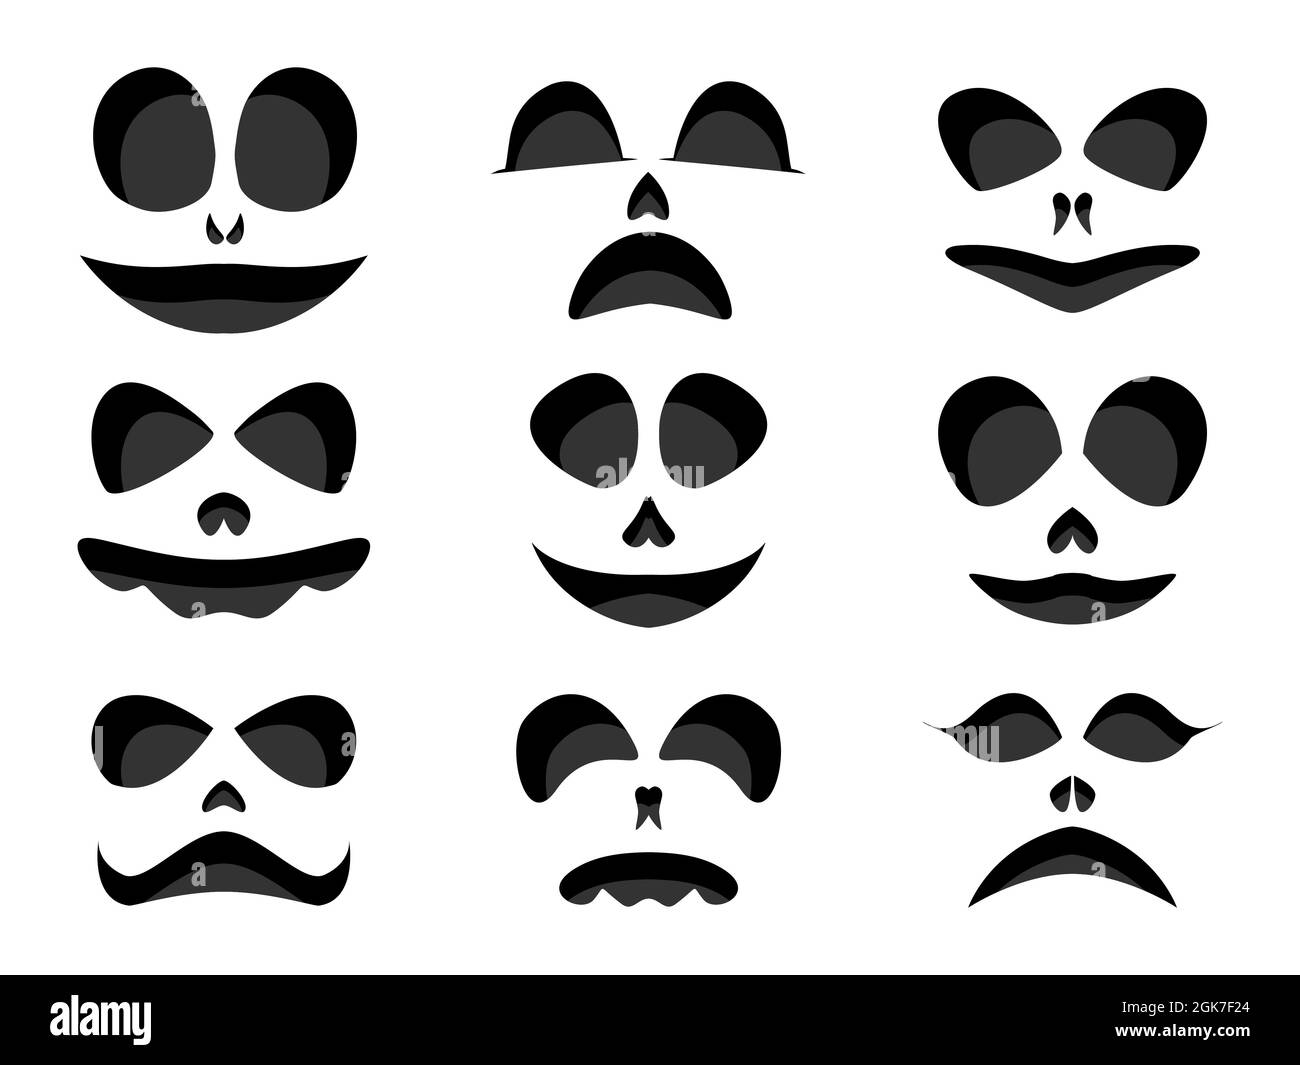 Scary face isolated on white background., Stock vector